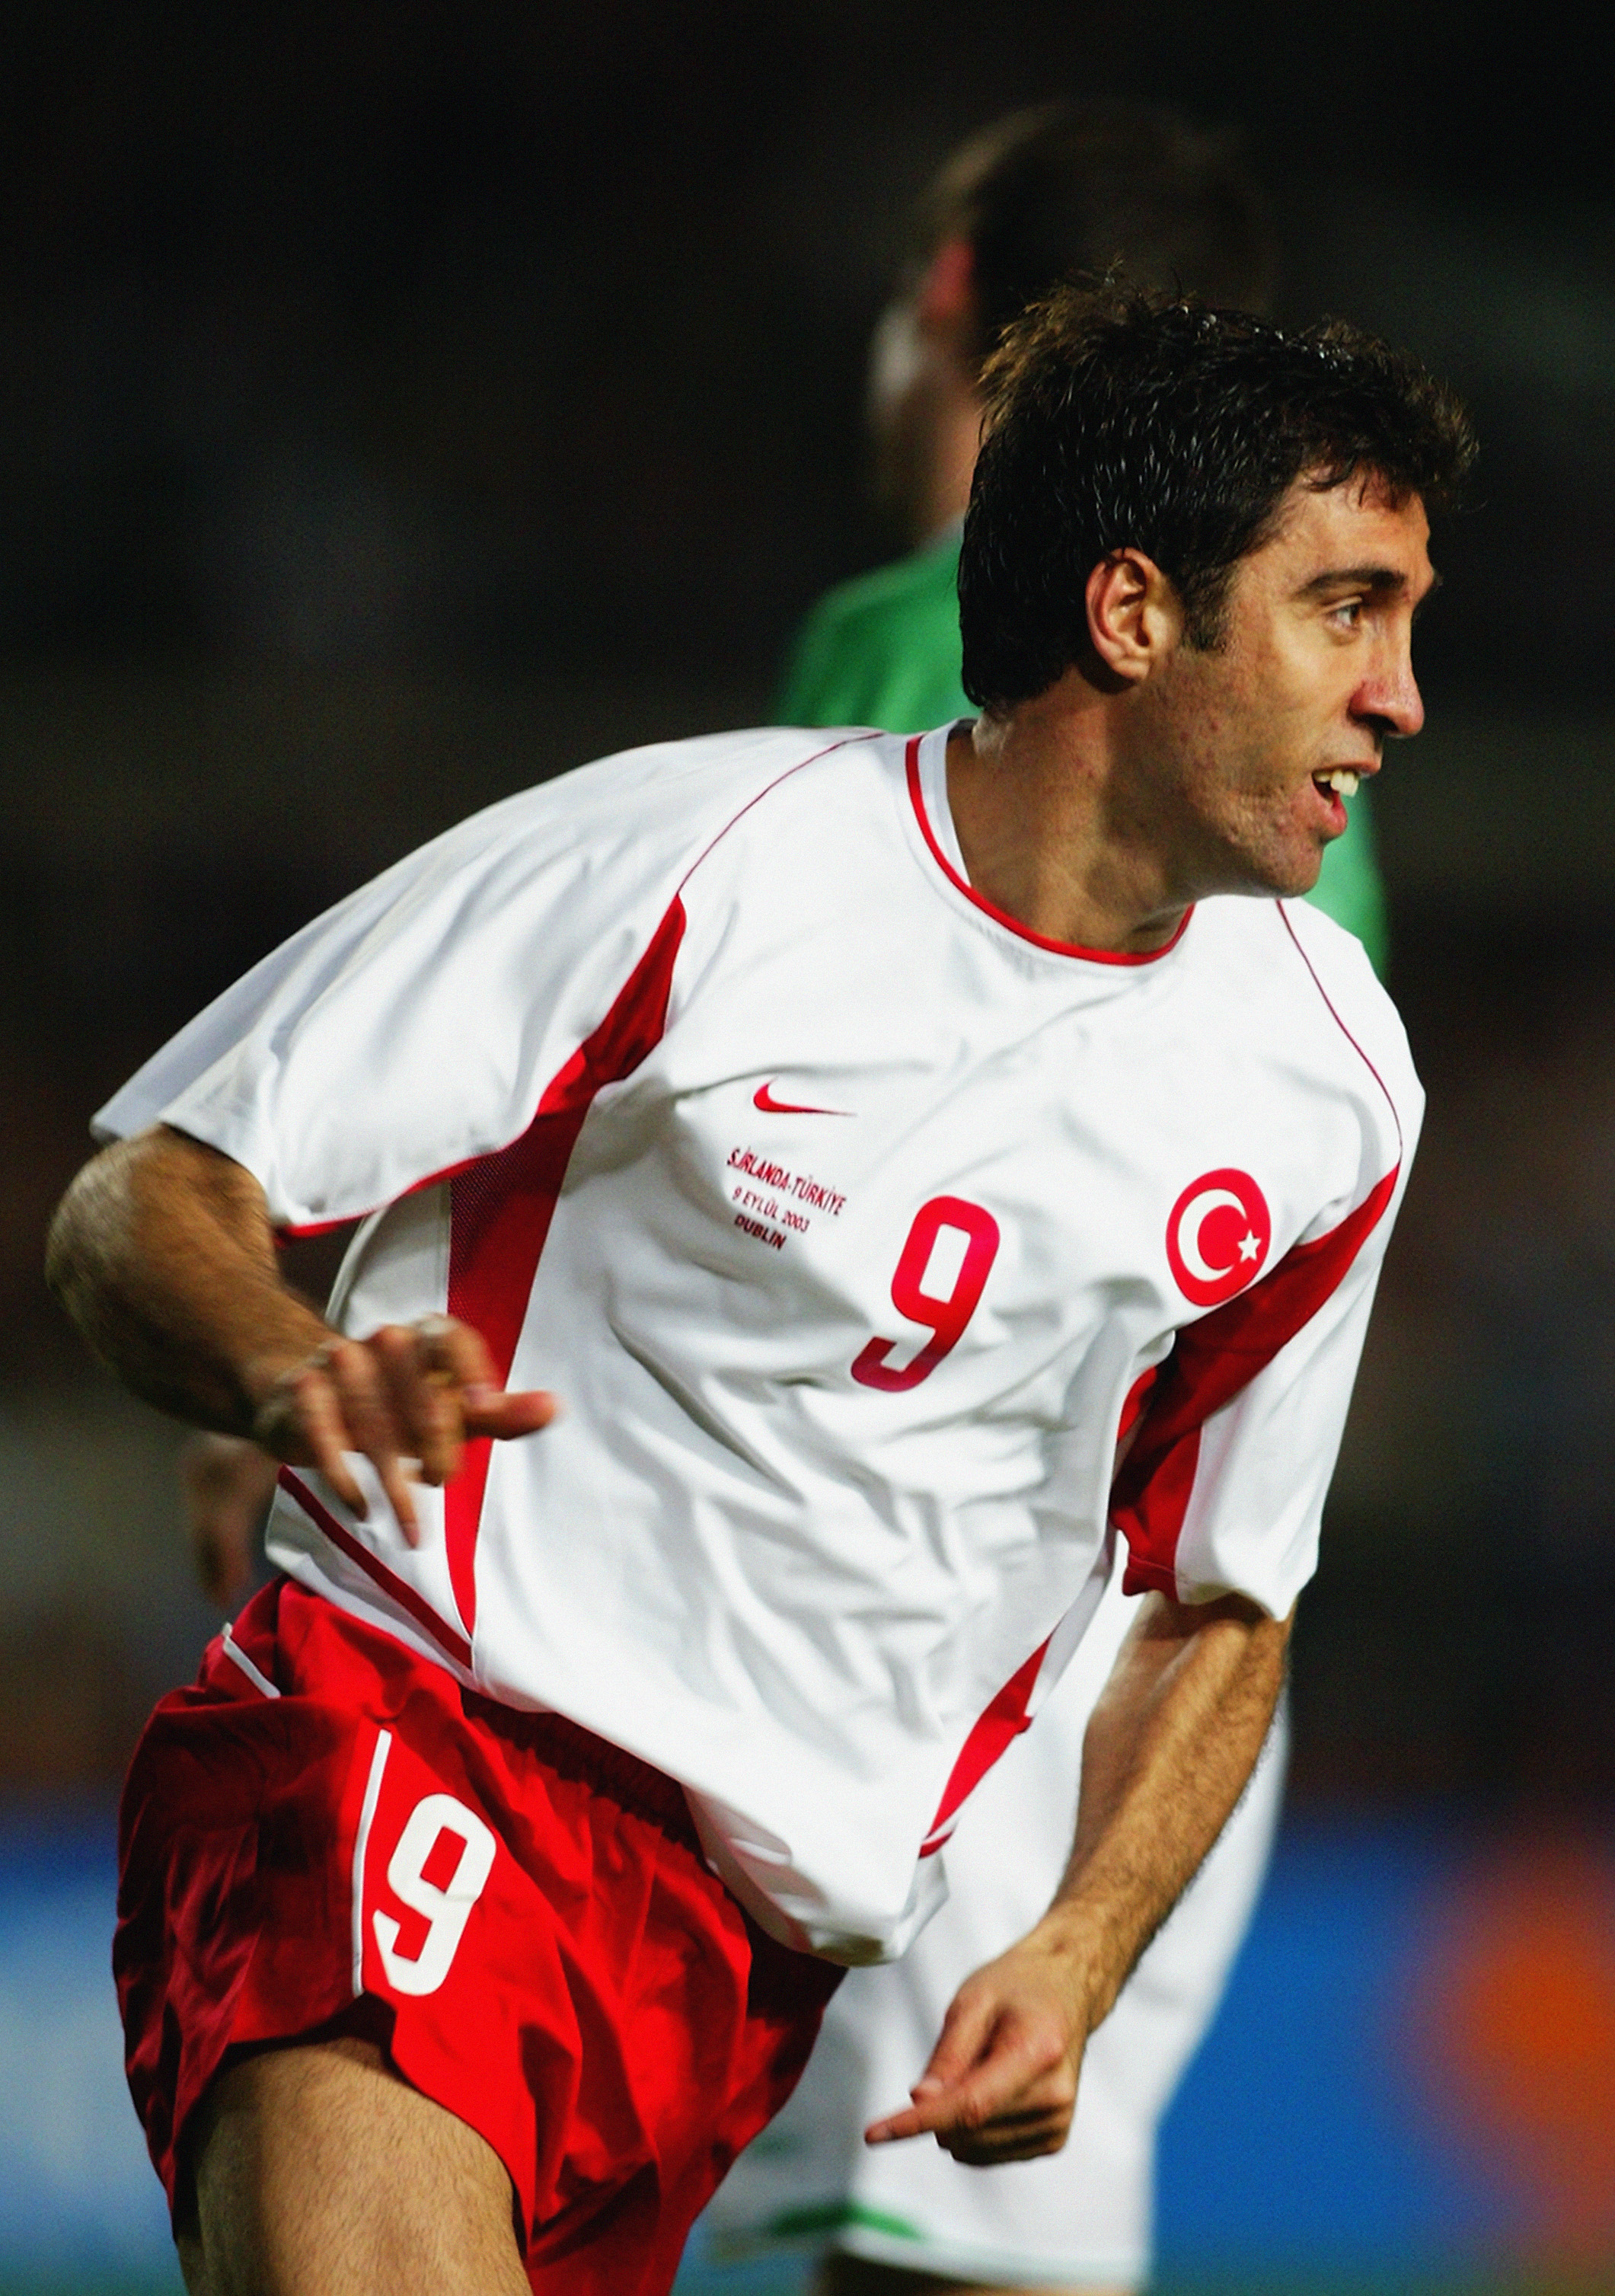 DUBLIN - SEPTEMBER 9:  Hakan Sukur of Turkey celebrates his goal during the International Friendly match between Republic of Ireland and Turkey held on September 9, 2003 at Lansdowne Road, in Dublin, Ireland. The match ended in a 2-2 draw. (Photo by Phil